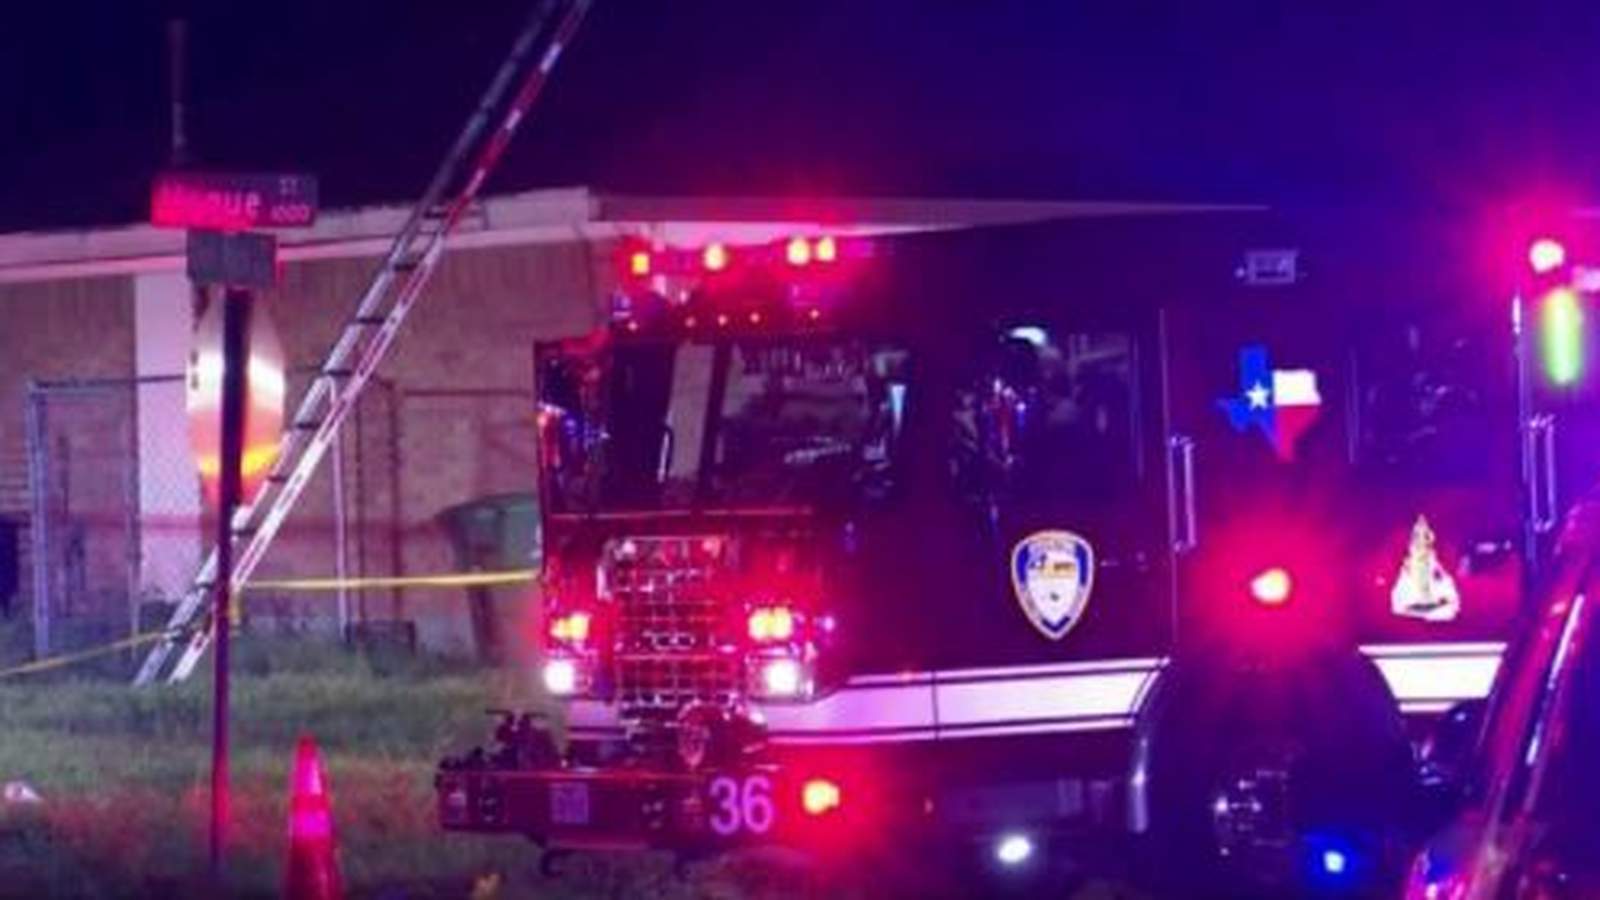 Man found dead with gunshot wounds in burning home in SE Houston, police say